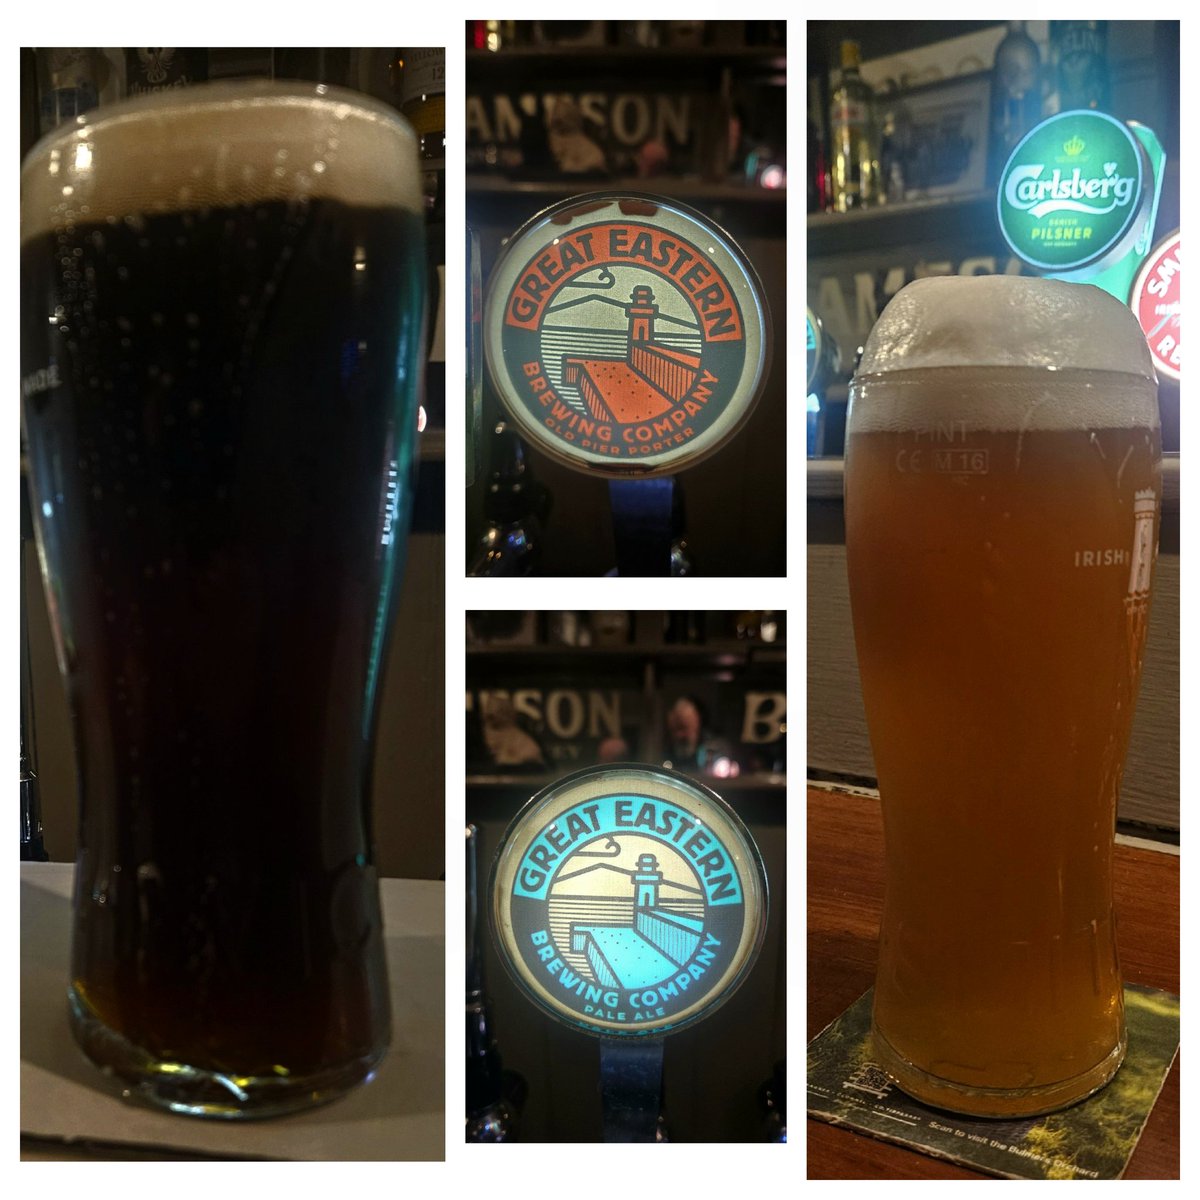 #greateasternbrewingco Fabulous addition to the #irishcraft beer scene. Old Pier Porter and Pale Ale. The porter for me is a Red ale, a classic malty delight and the #paleale is a hoppy American style. Two great beers on tap in Tá Sé pub Wicklow town #sláinte 🍻

#craftbeer